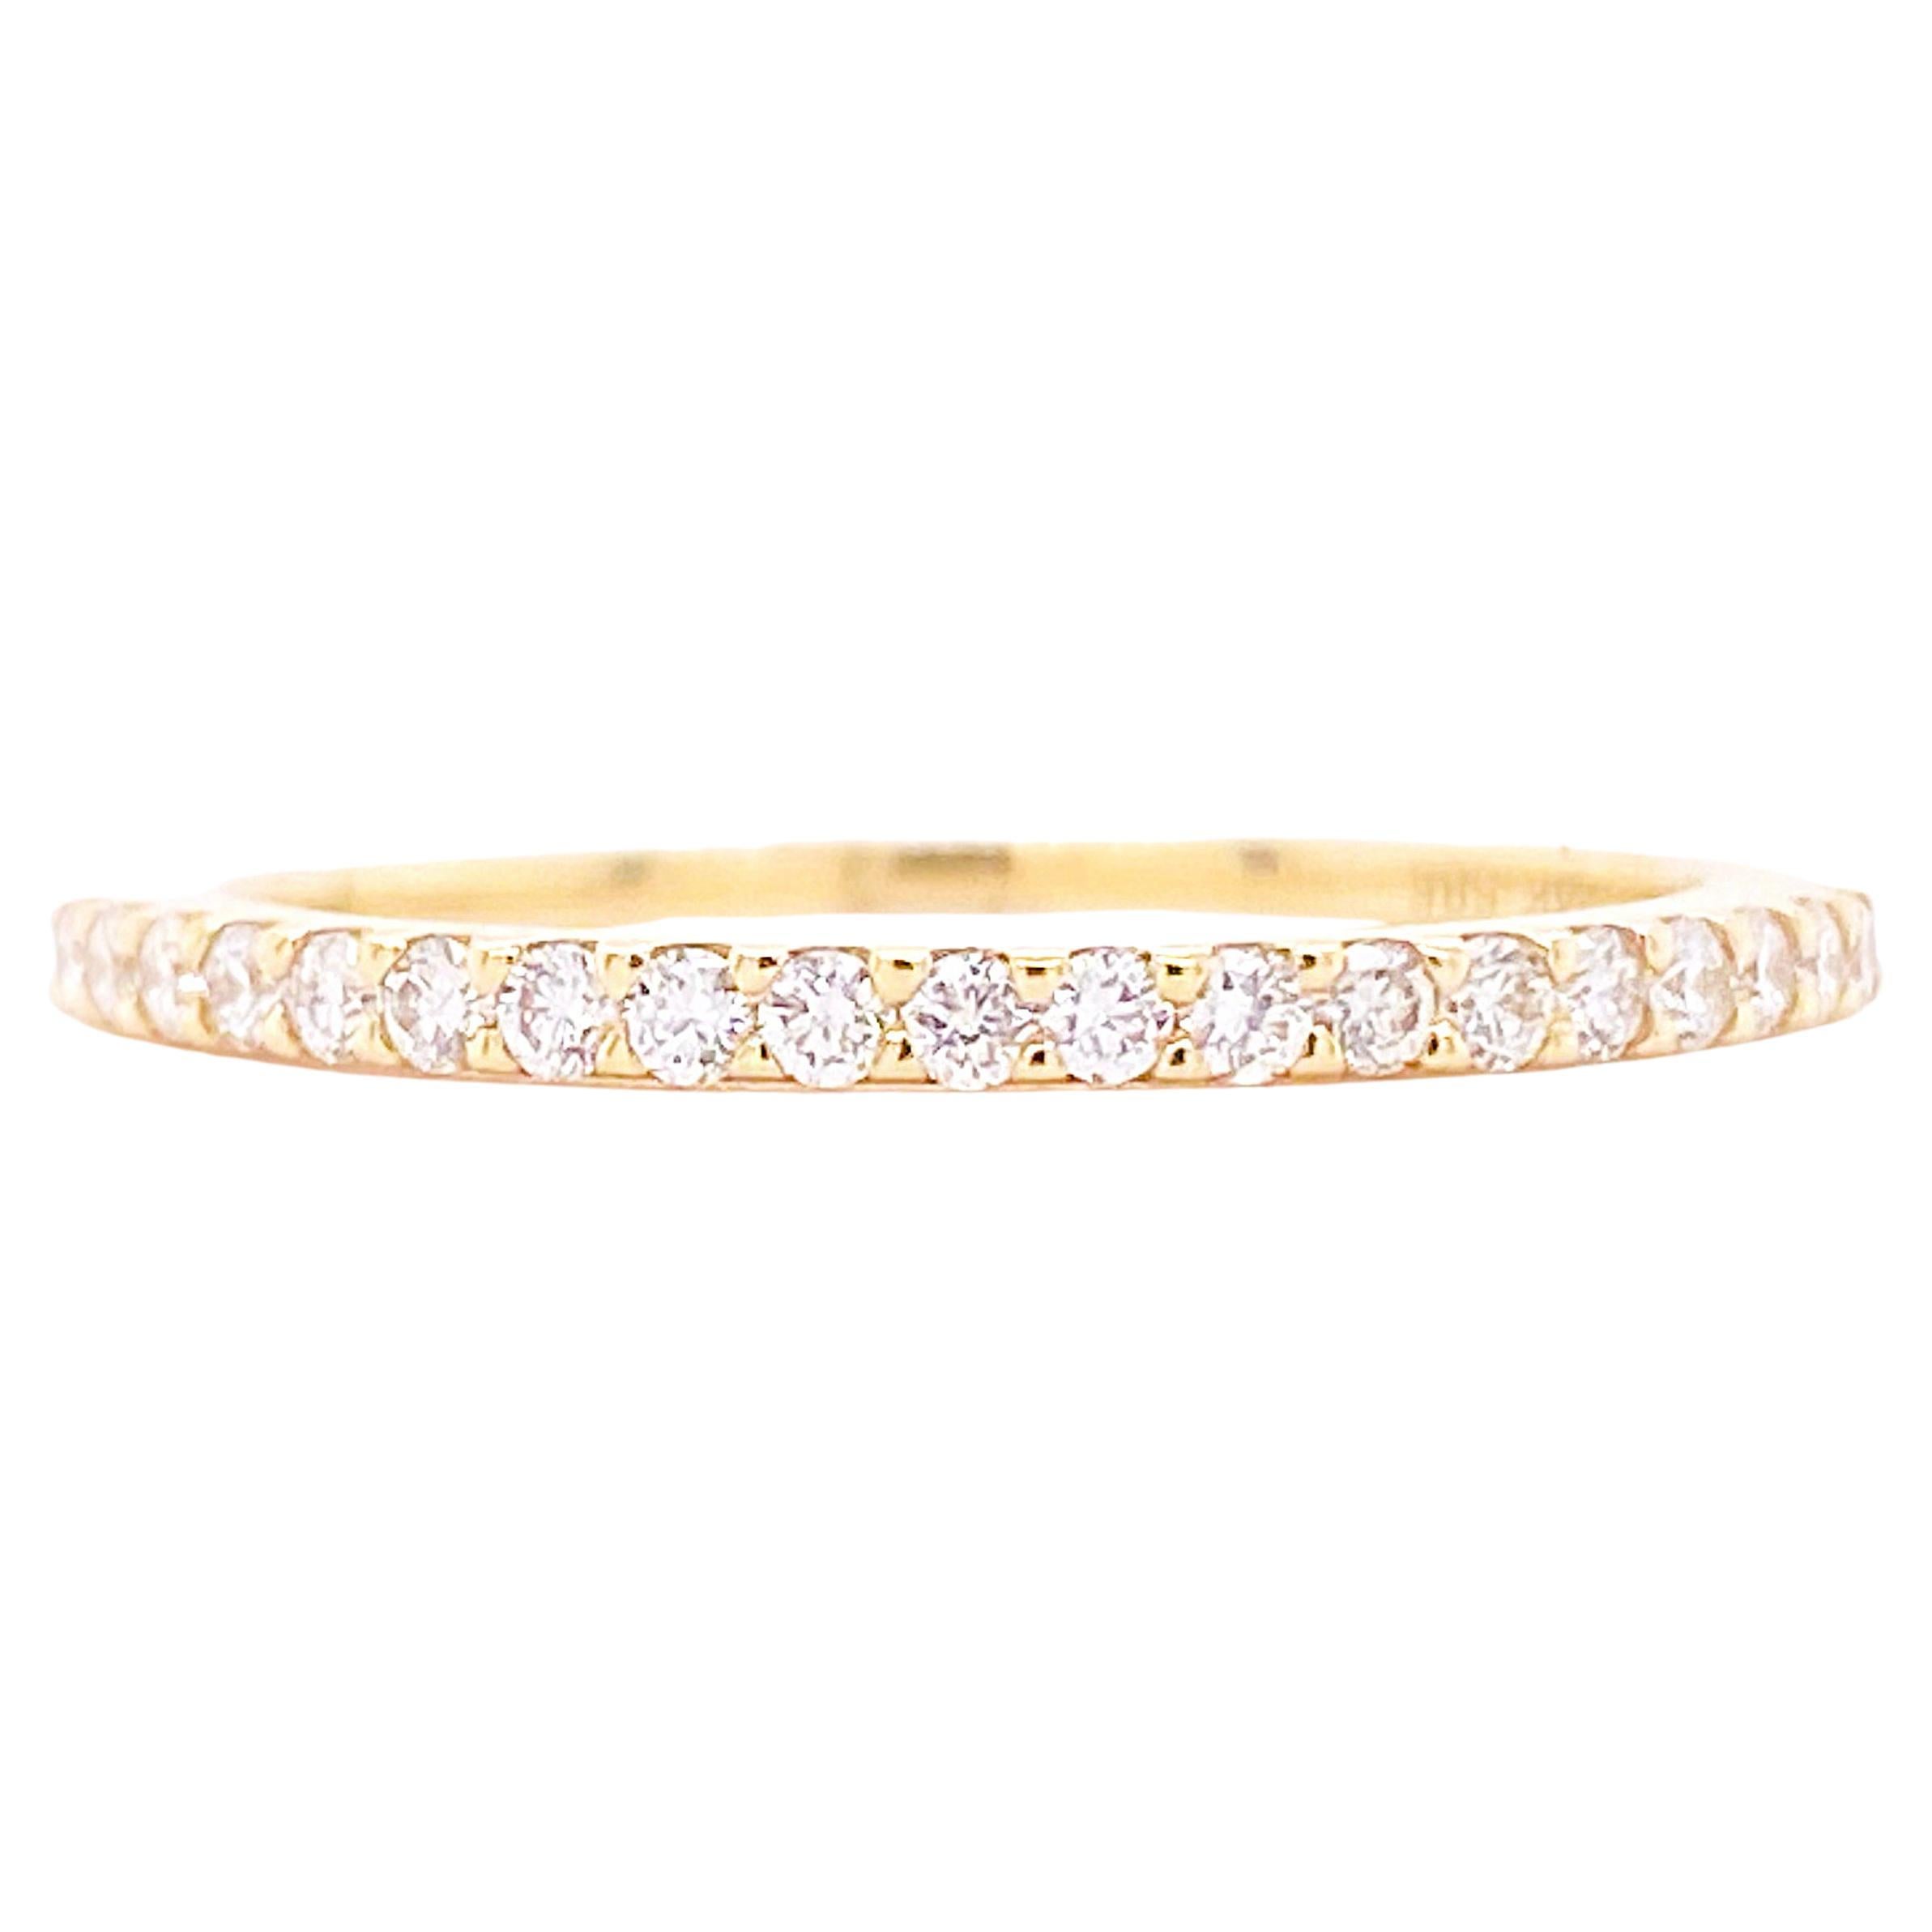 Straight Diamond Band, Yellow Gold, Wedding Ring or Stack Ring, Shared Prongs